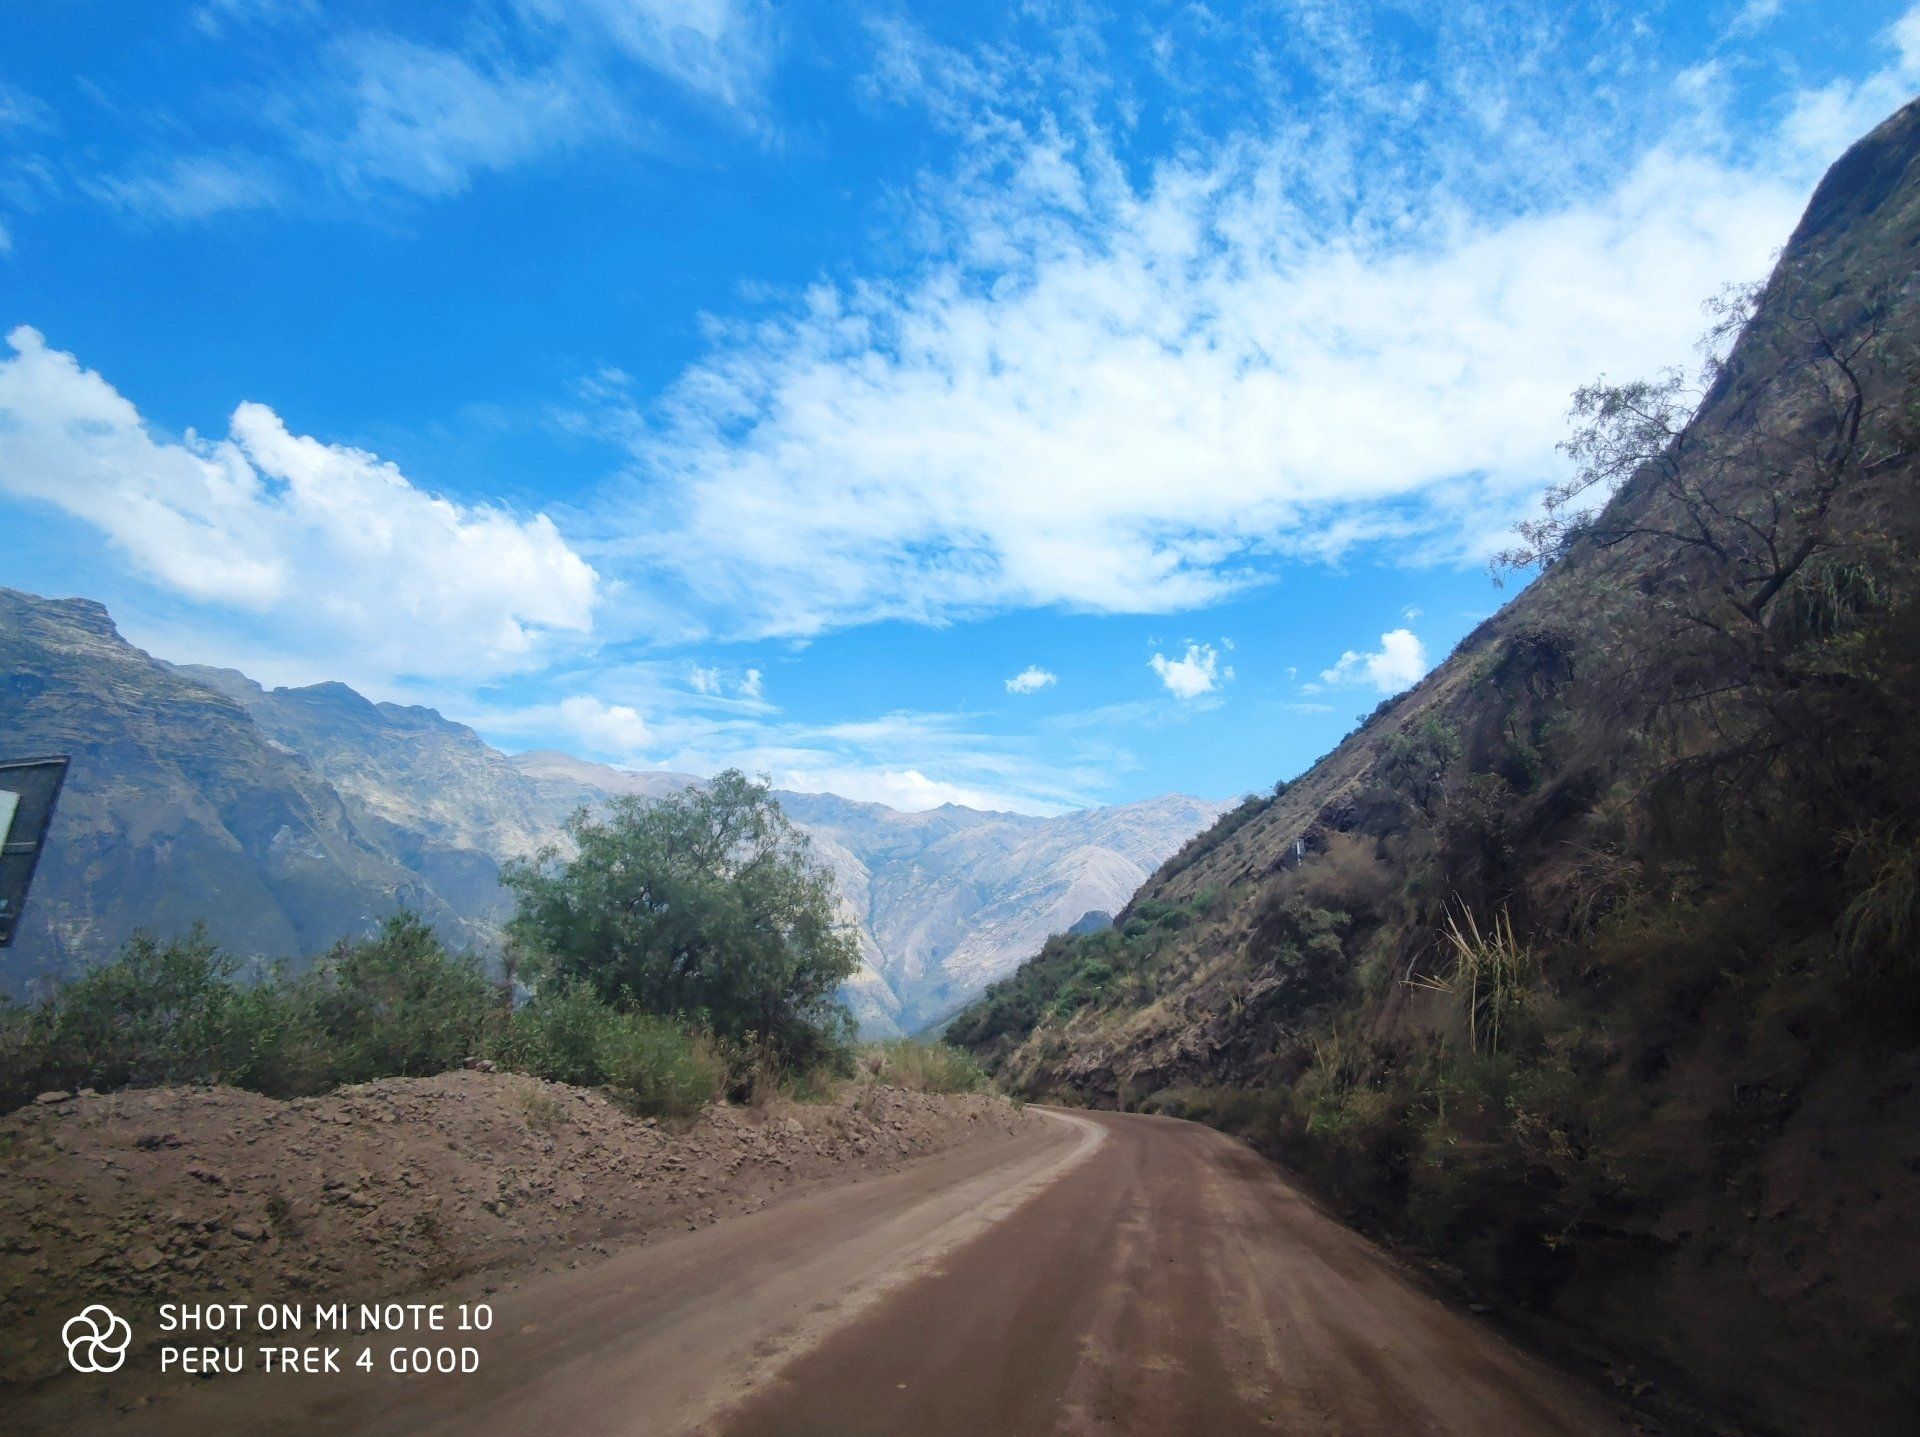 Driving into the Apurimac Canyon